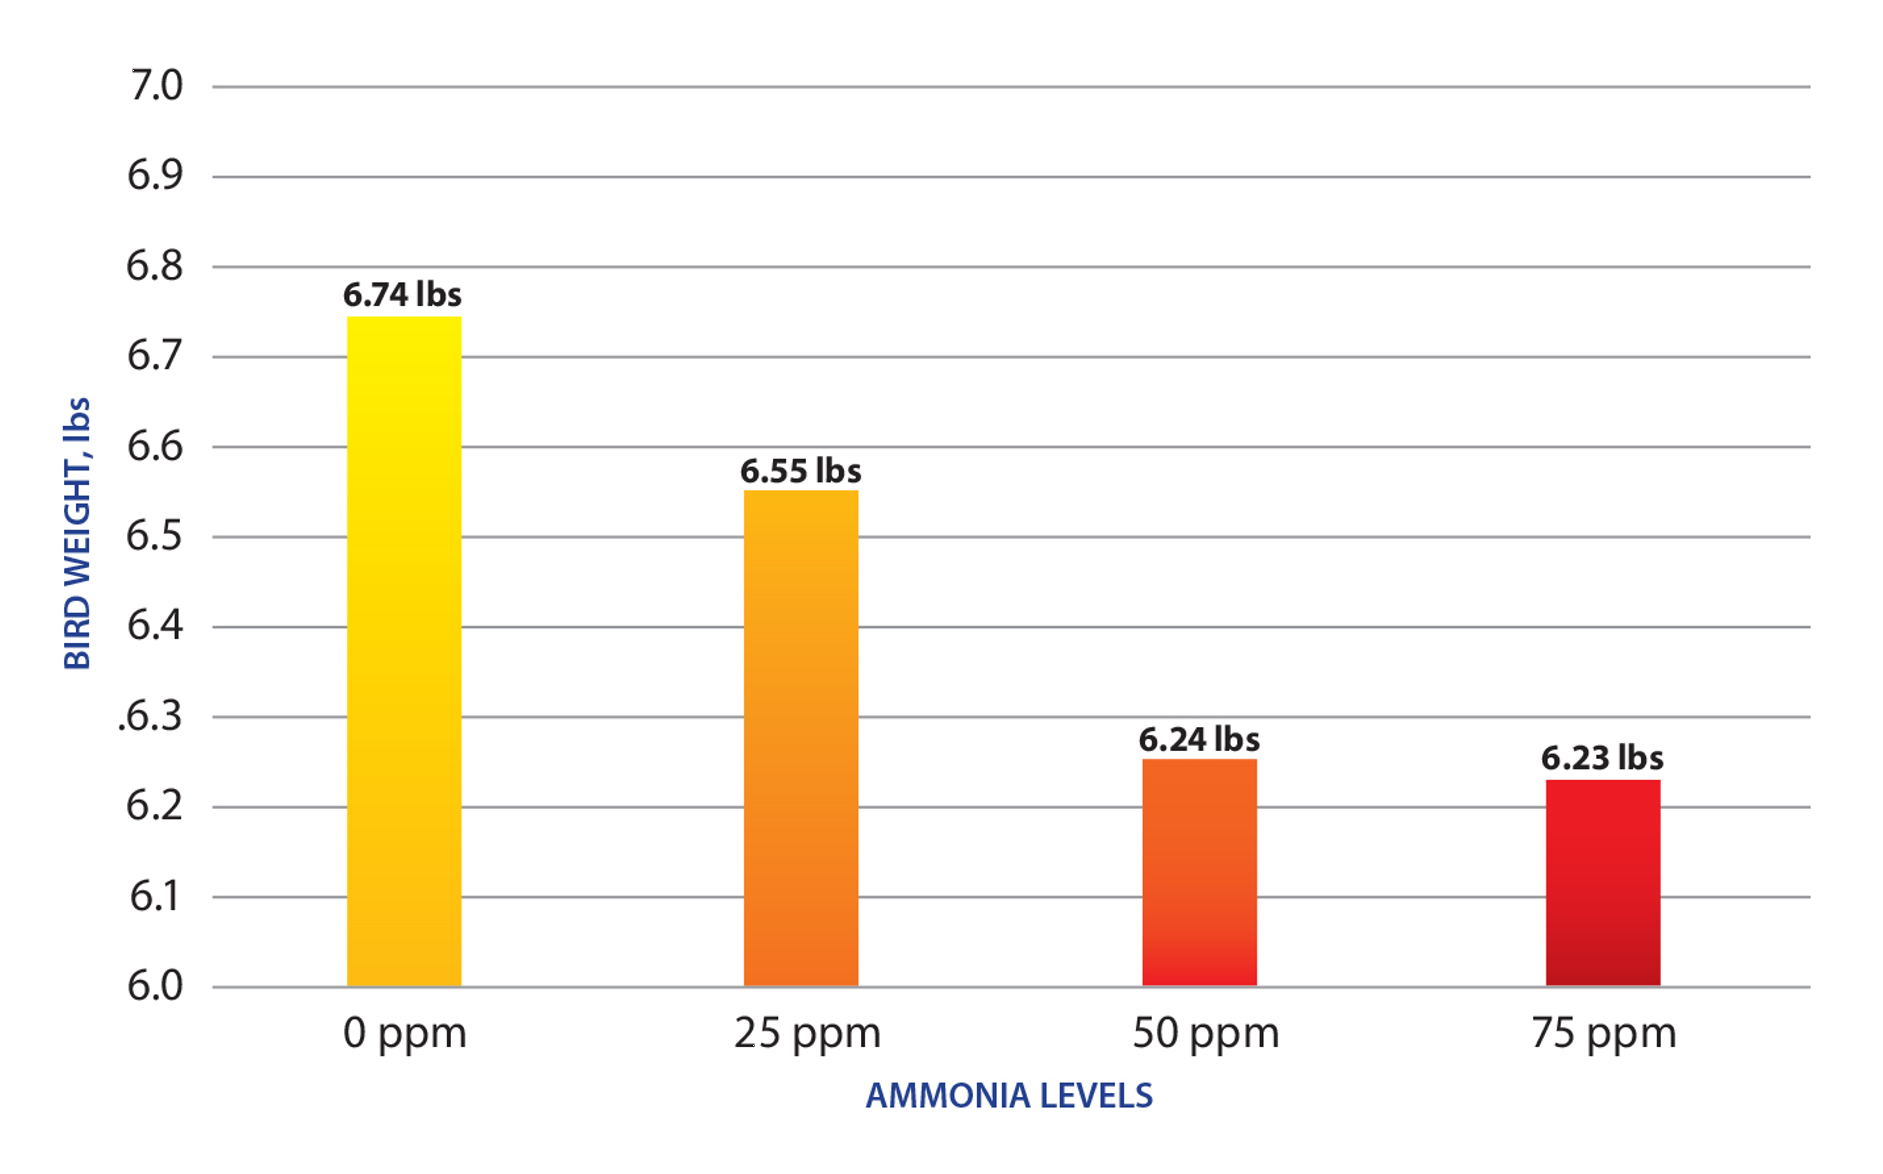 EFFECTS OF AMMONIA ON WEIGHT AT 7 WEEKS